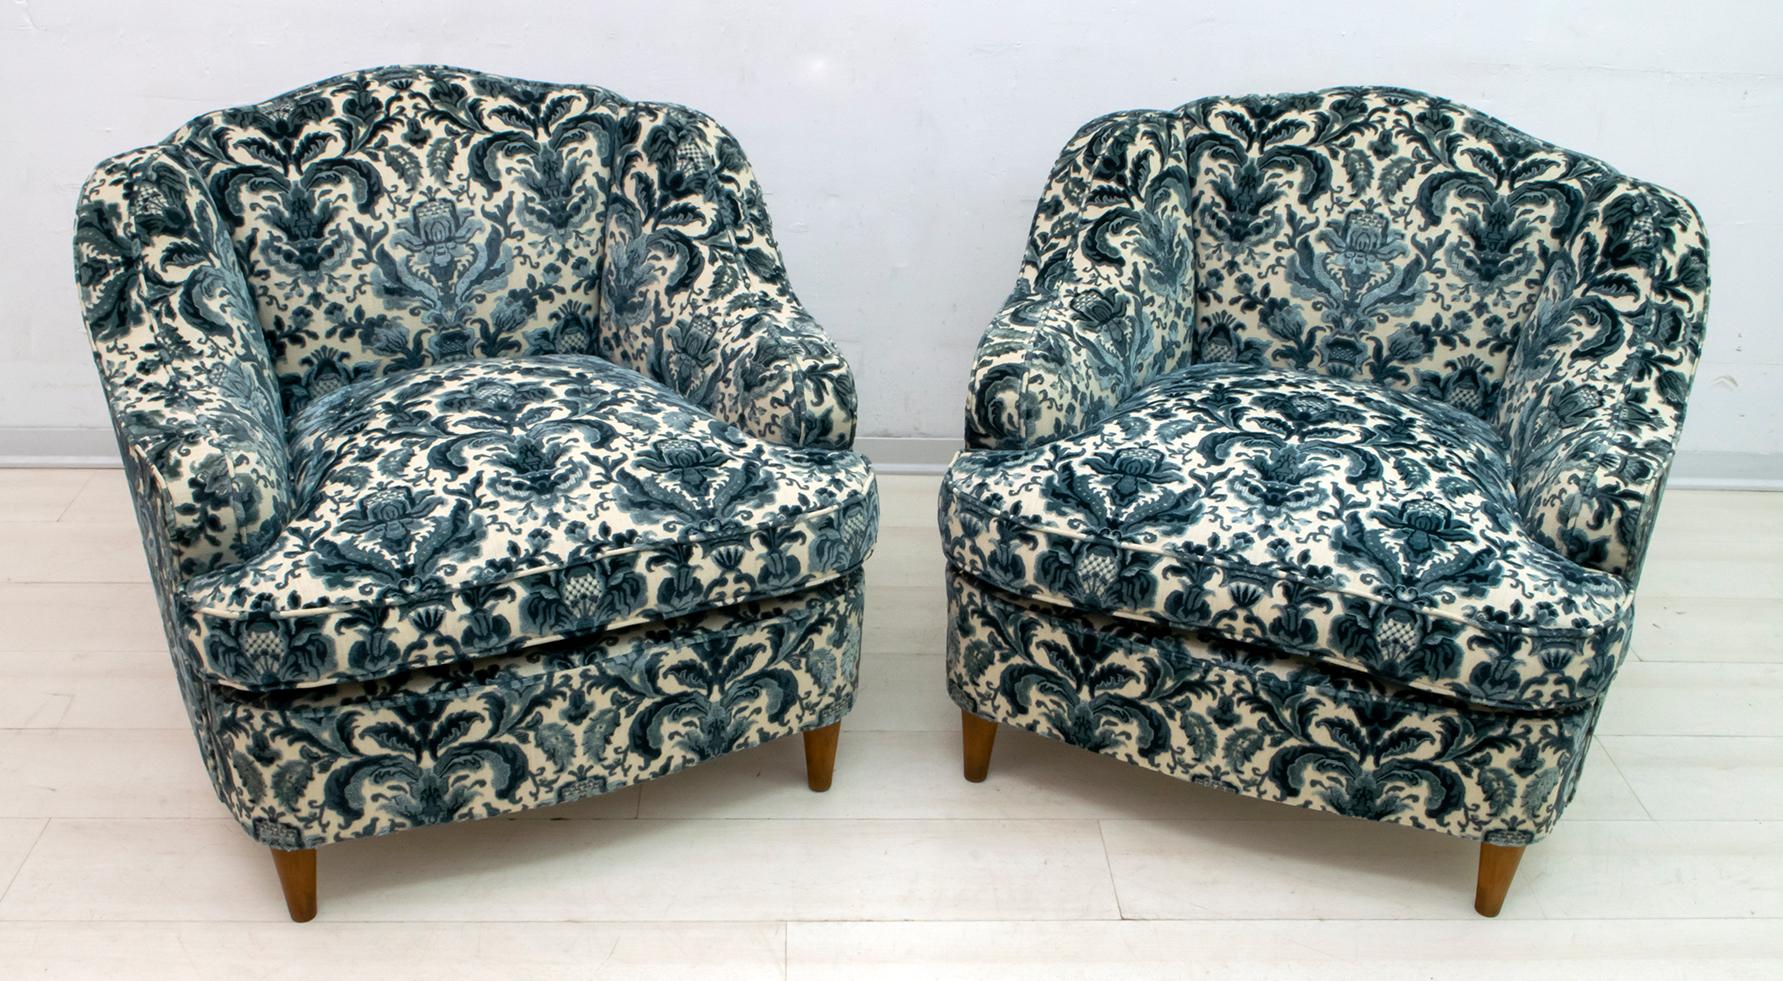 Elegant and splendid pair of Gio Ponti style armchairs, Mid-Century Modern with textured velvet upholstery, 1960. Sculpted profile, refined lines, sensual and deep comfort. The upholstery is like new, little used and the cushions are in goose down.